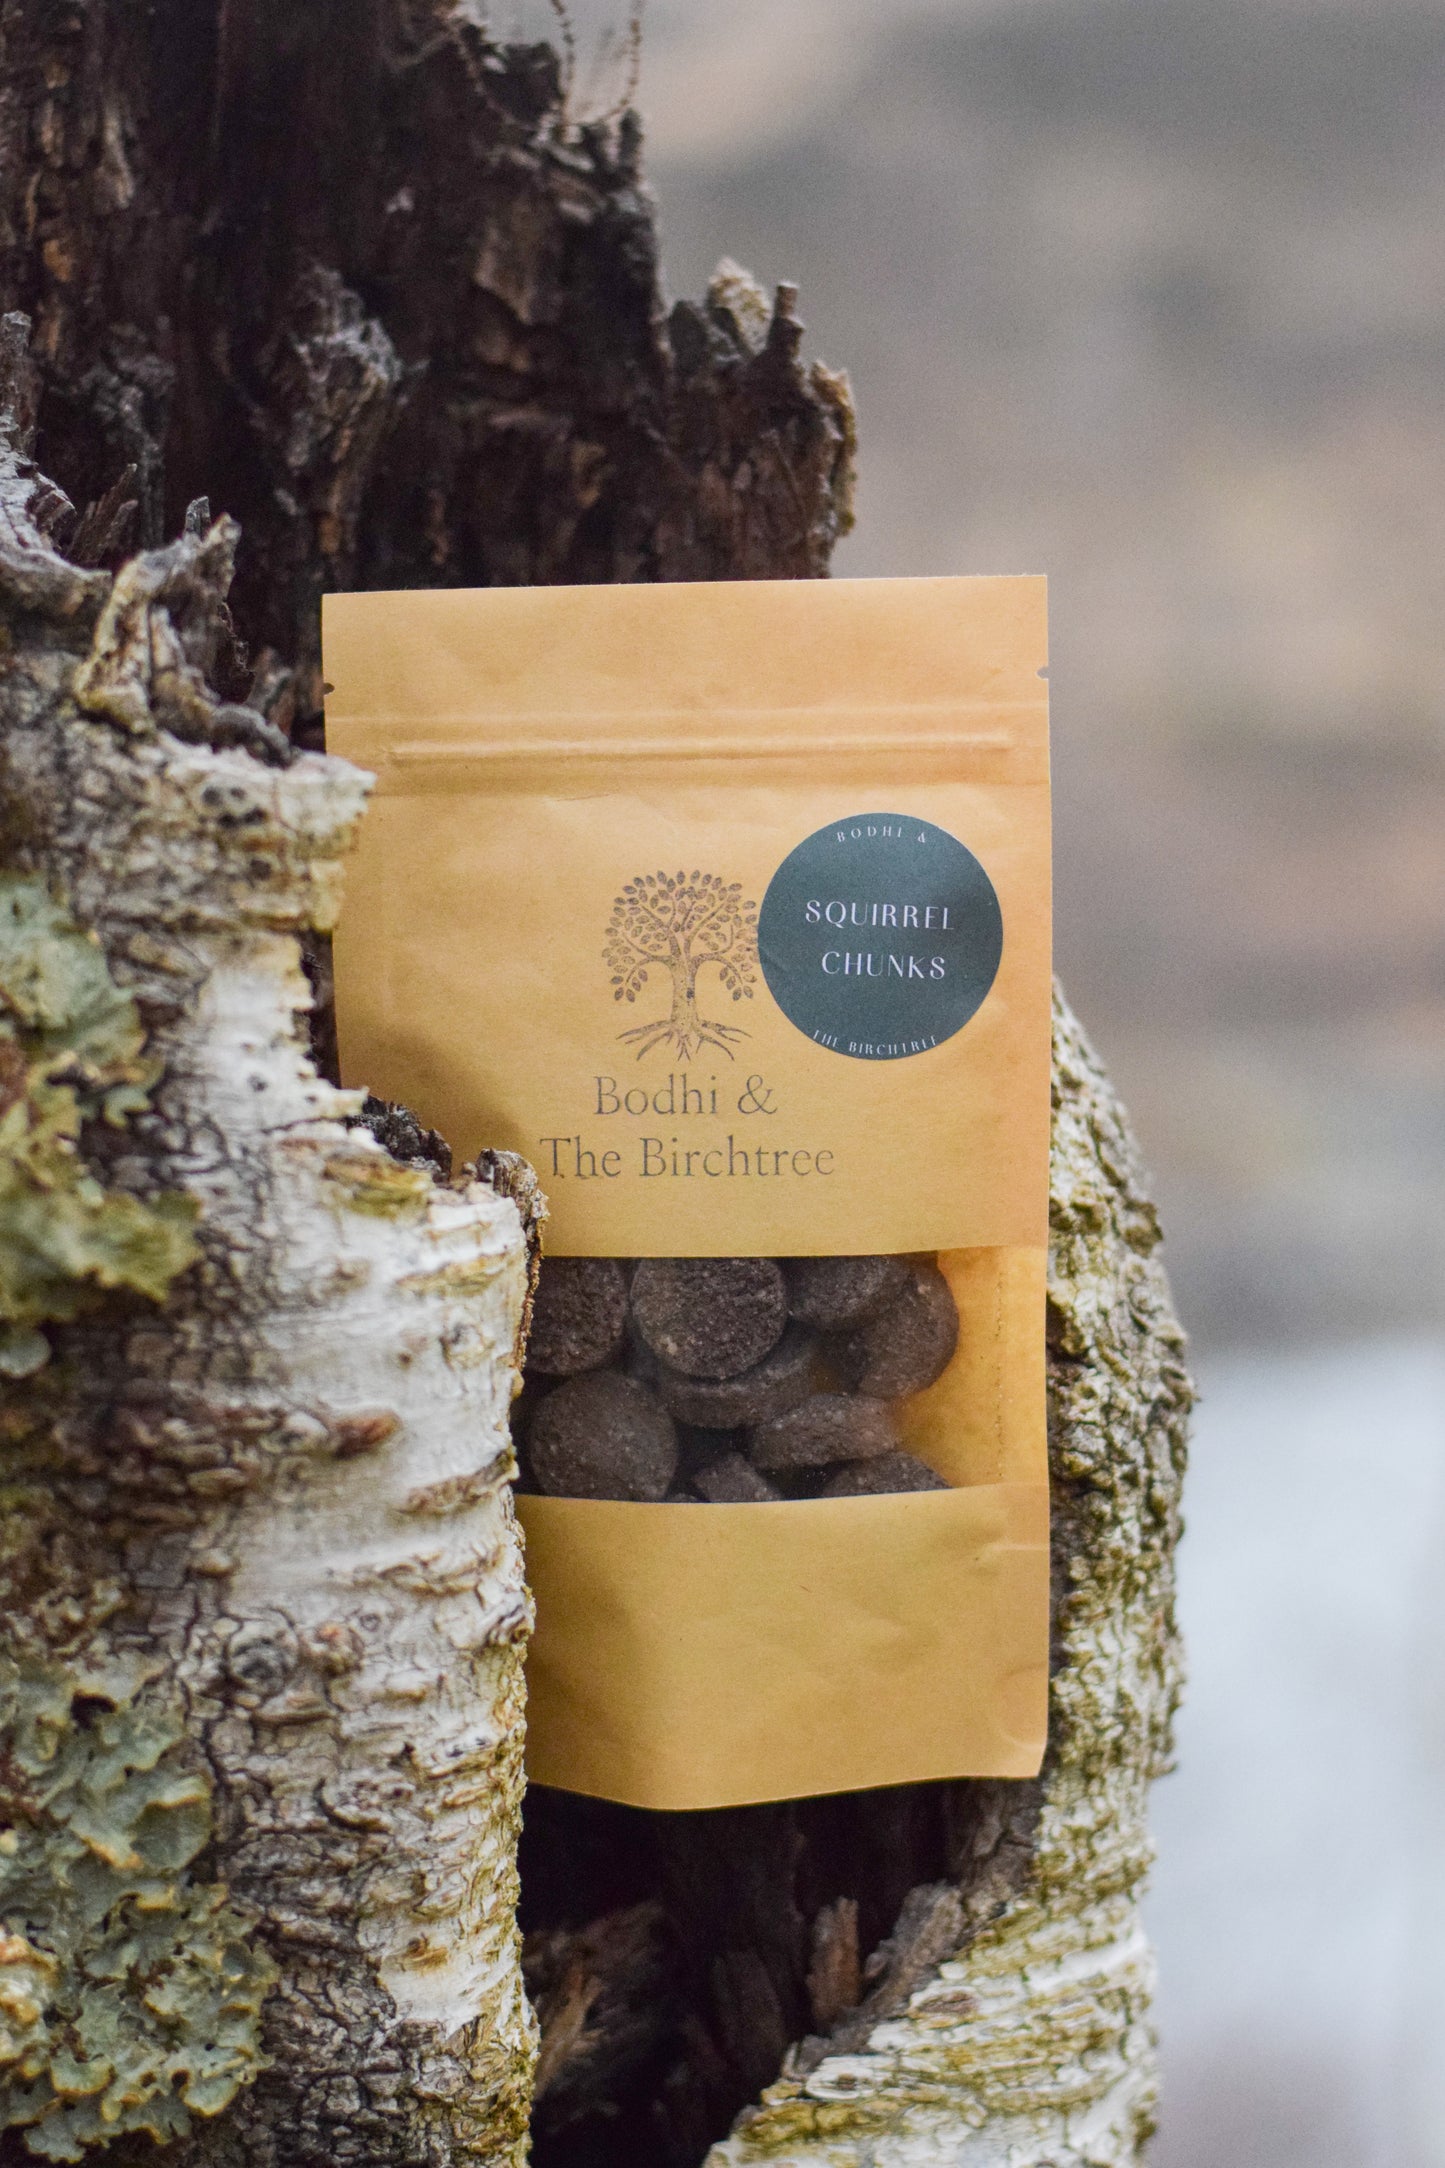 Bodhi & The Birchtree Squirrel Chunks 80g - Bodhi & The Birchtree